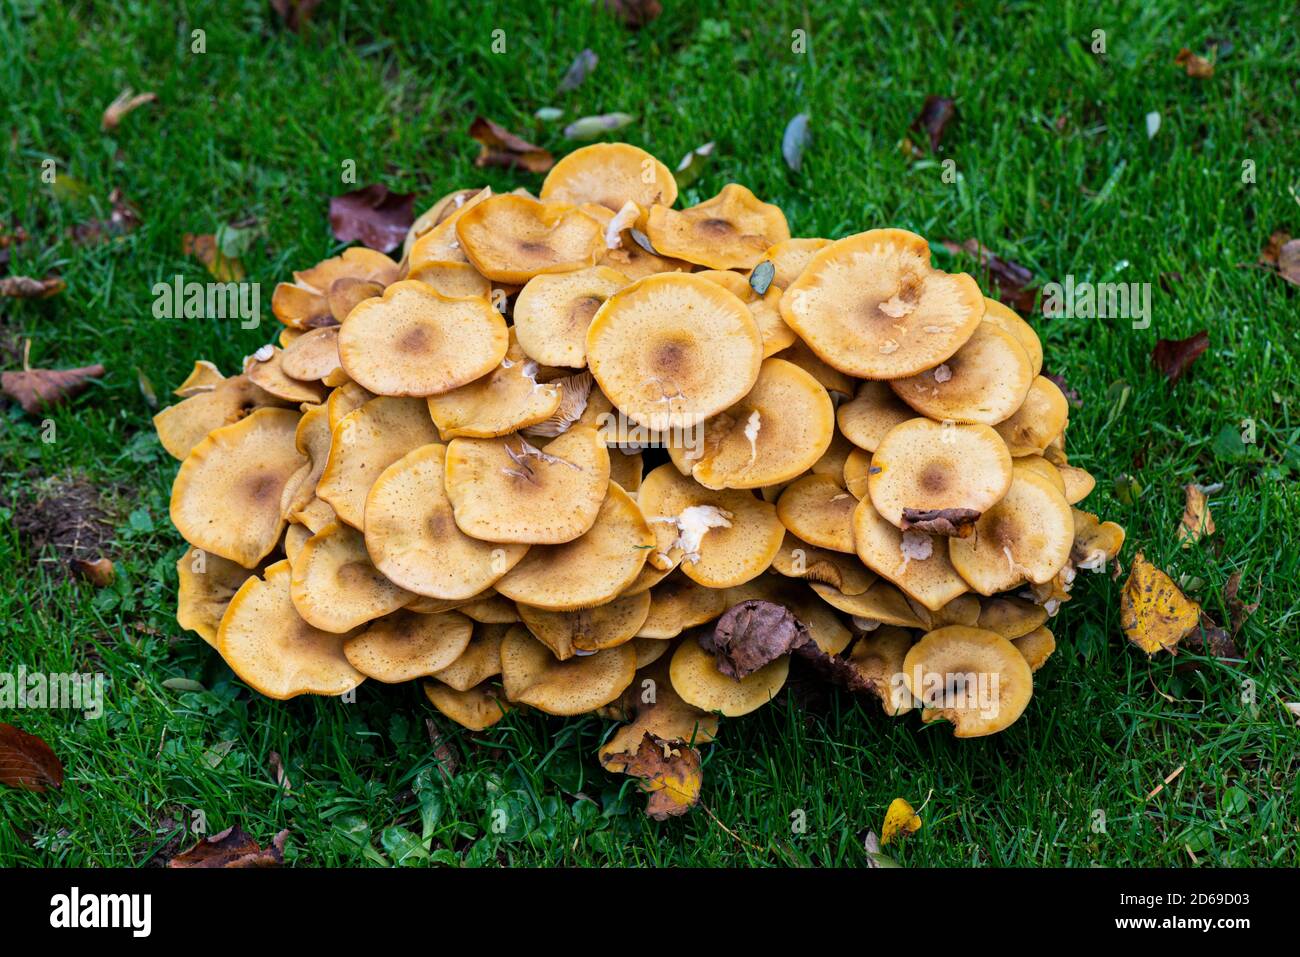 A large group of fungi growing in grass Stock Photo